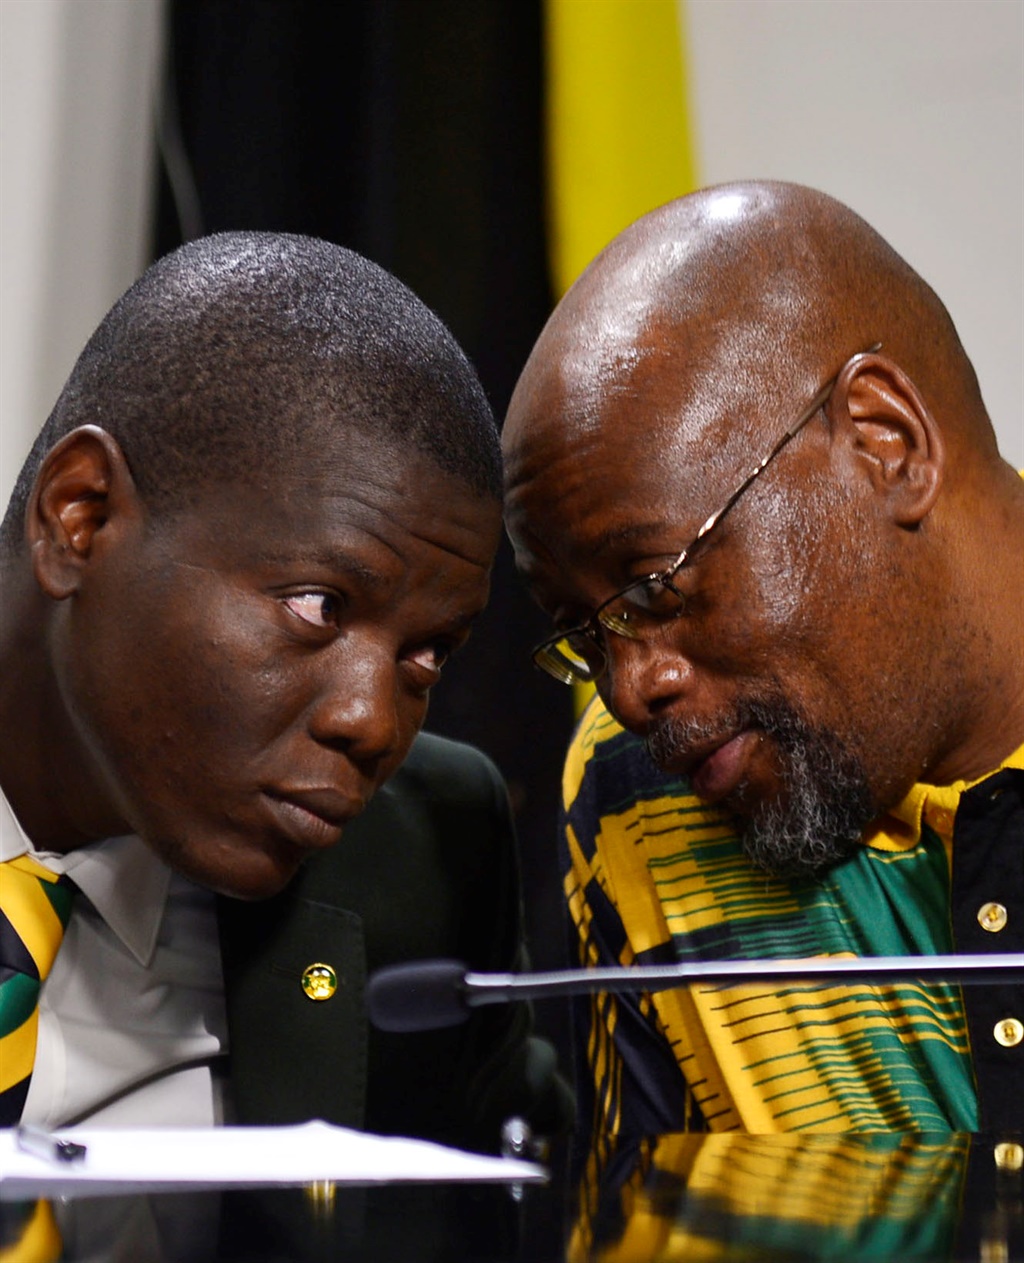 Ronald Lamola and Sdumo Dlamini during the ANC's media briefing about the party's decision to amen the Constitution to allow land expropriation. (Photo: Gallo Images)